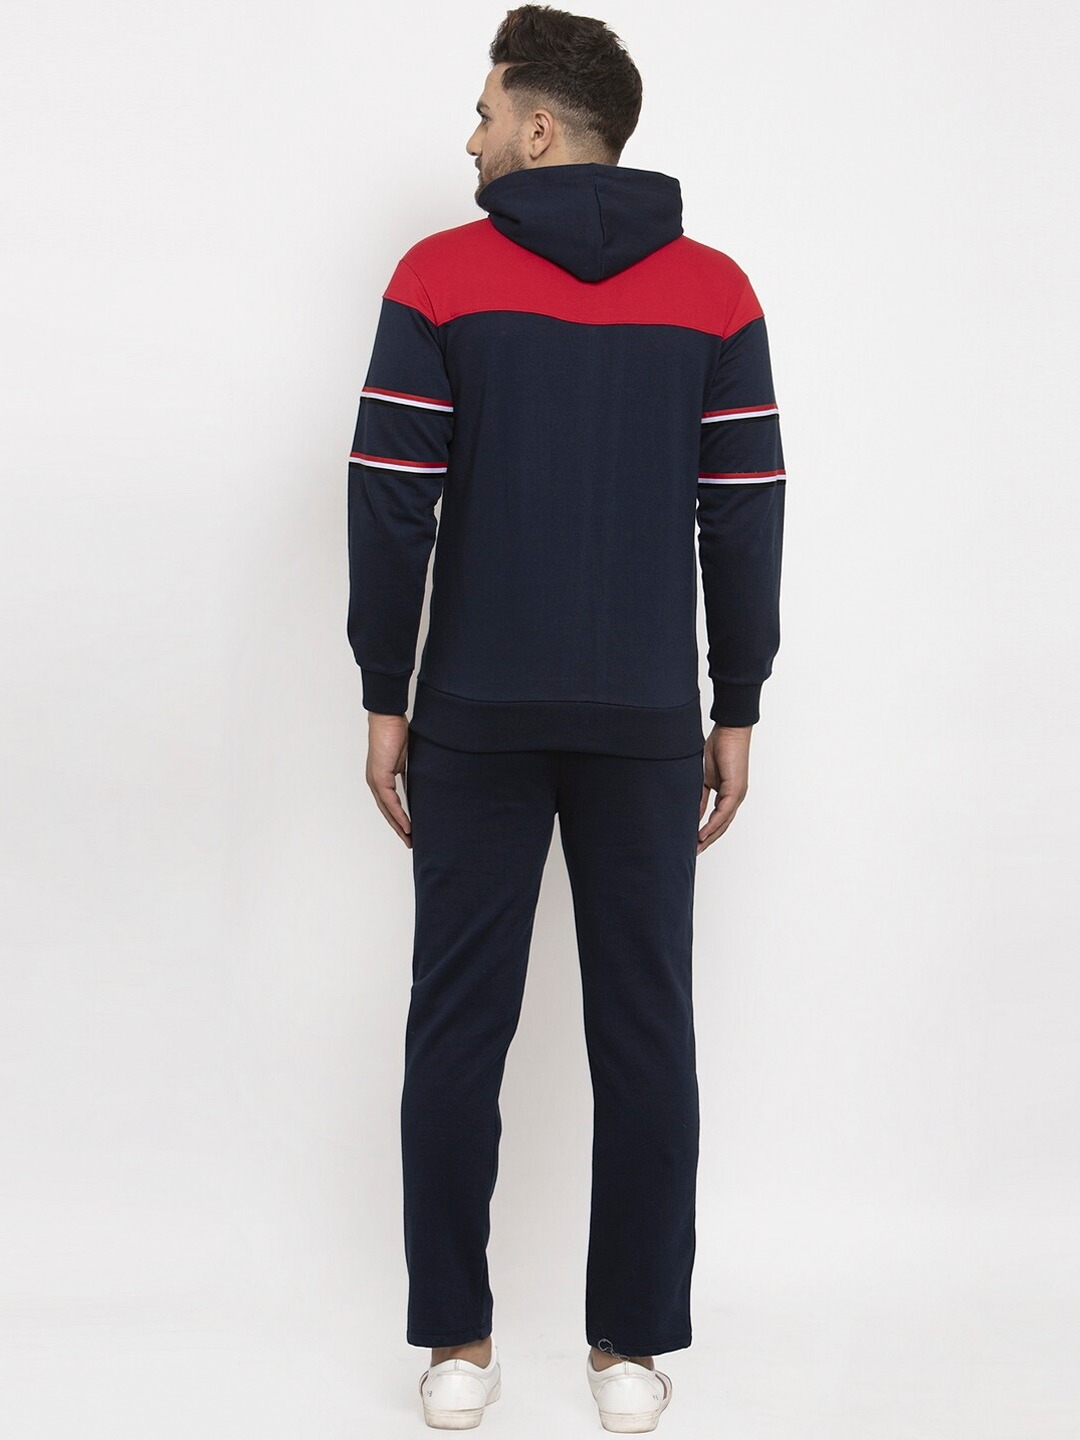 Clothing Tracksuits | WILD WEST Men Navy Blue & Red Colourblocked Tracksuit - BS47147